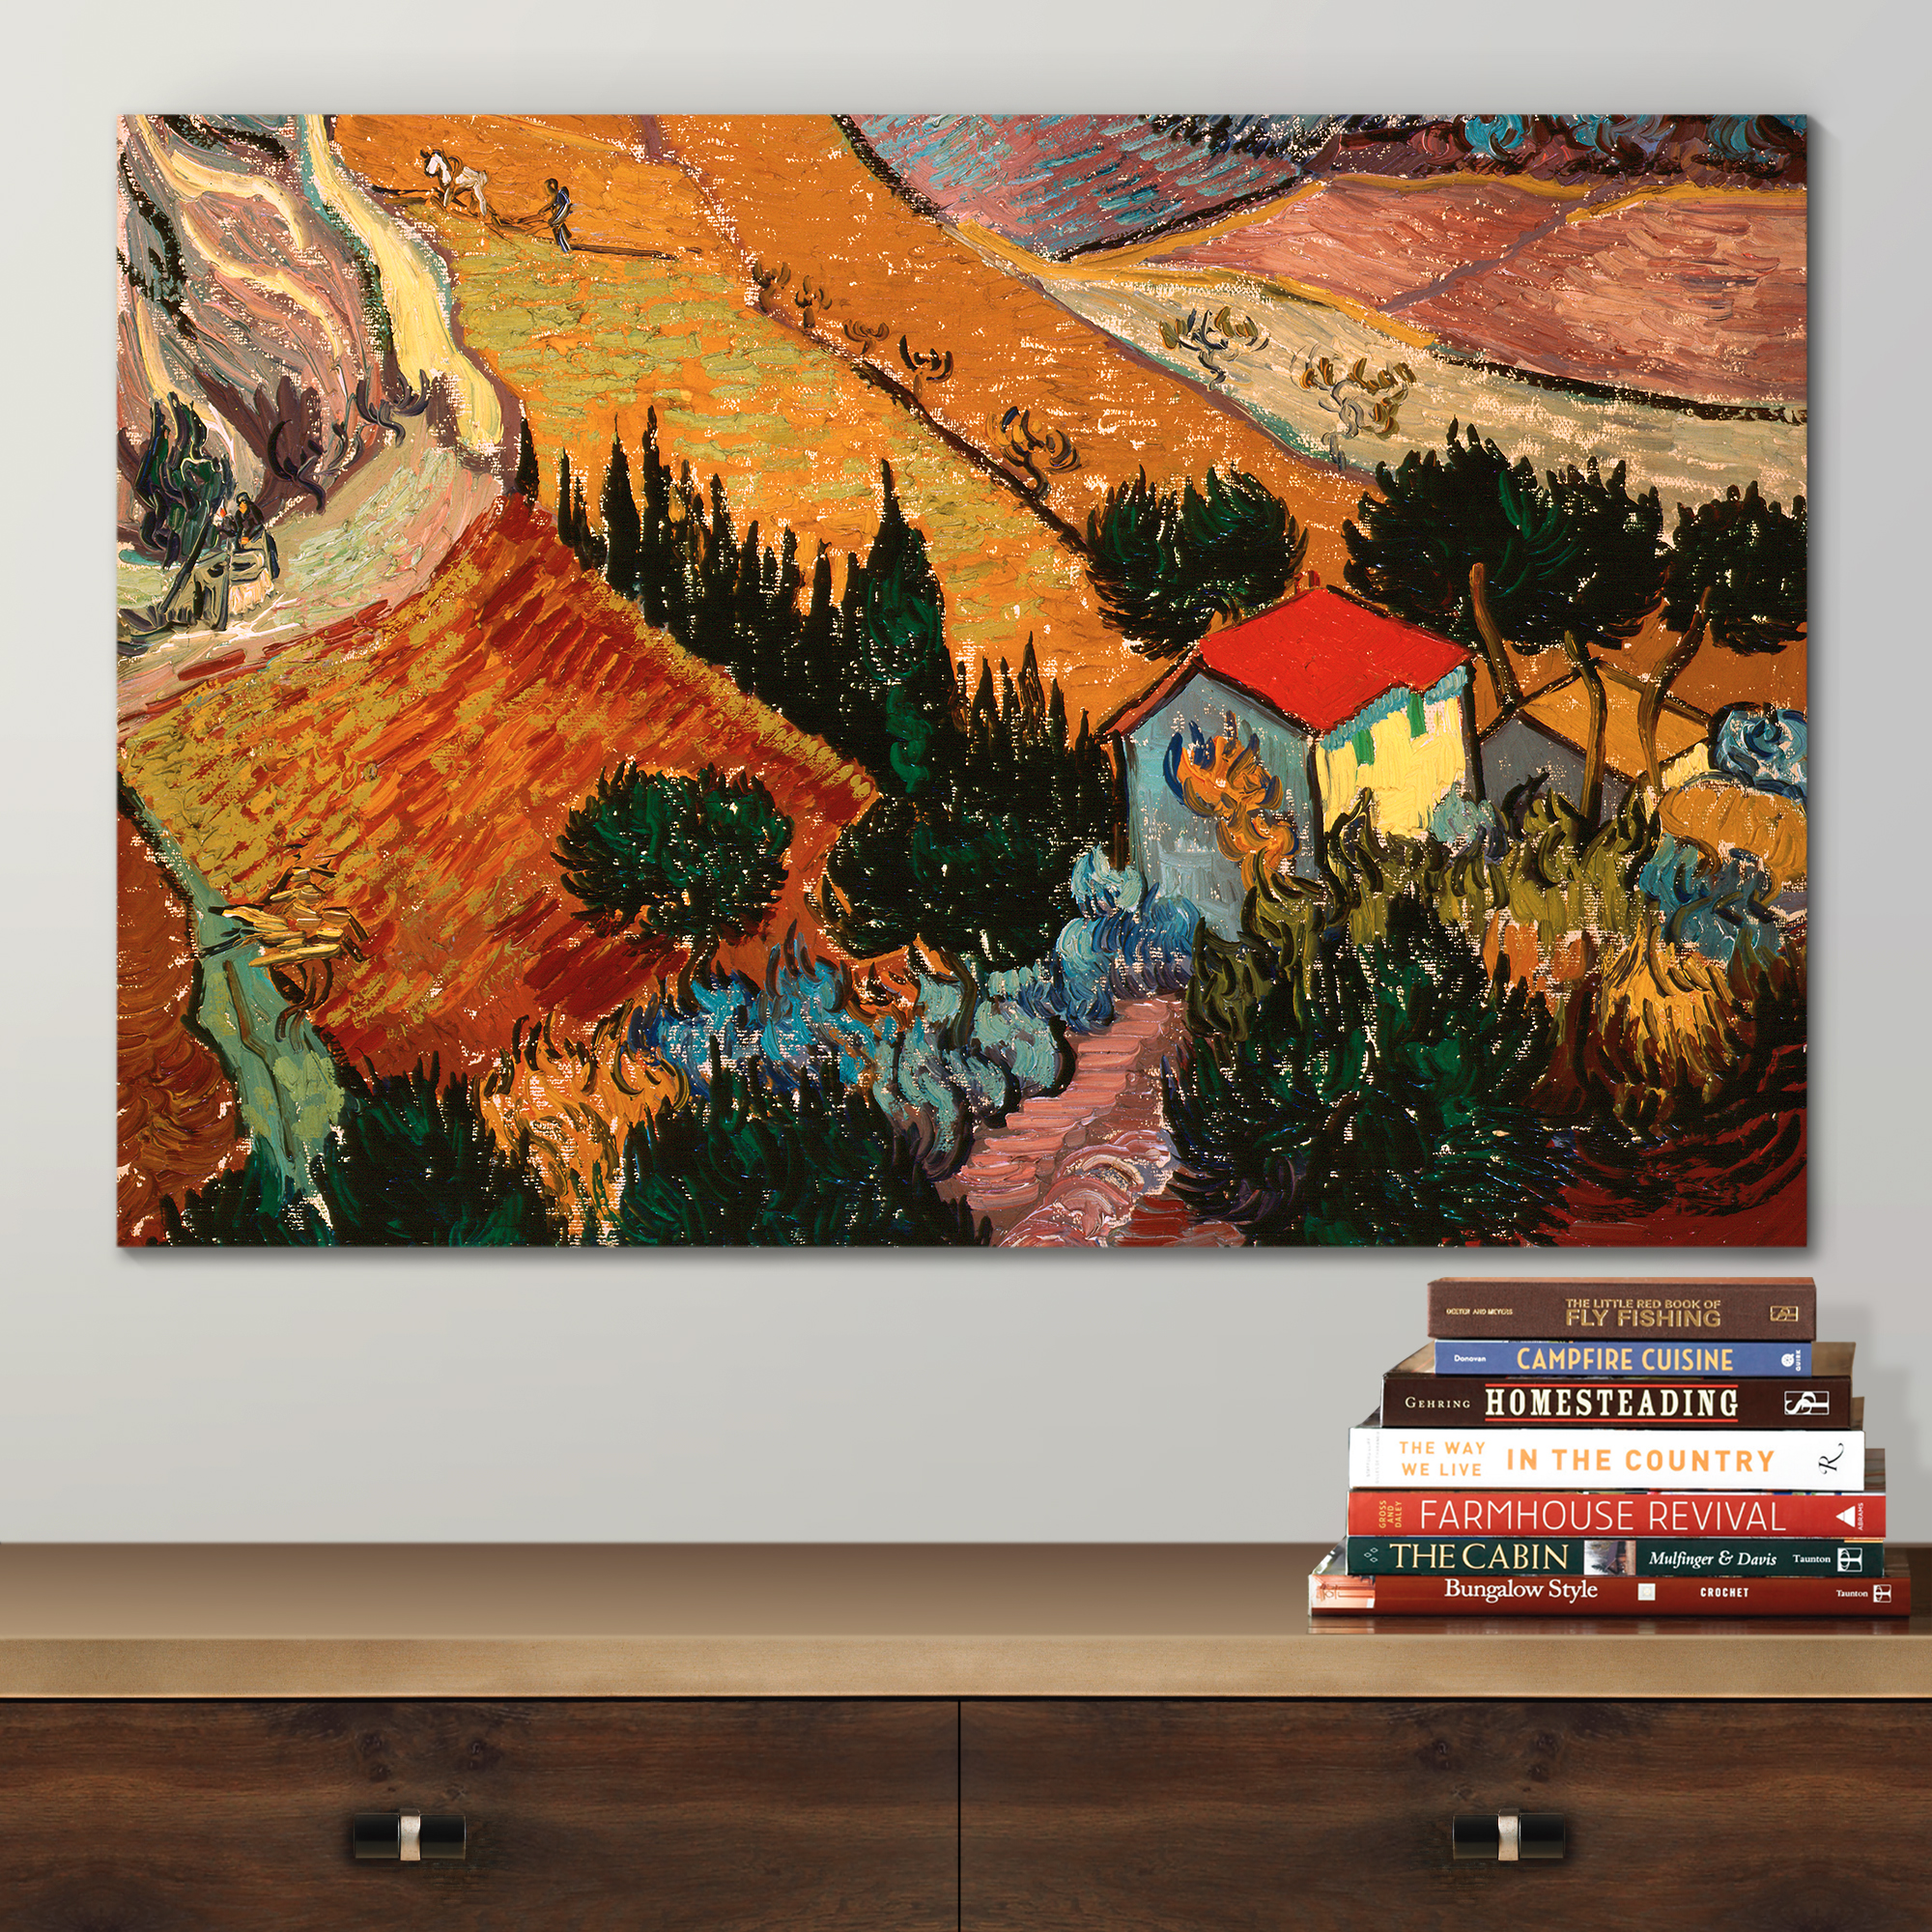 Valley with Ploughman Seen from Above by Vincent Van Gogh - Canvas Print Wall Art Famous Painting Reproduction - 32